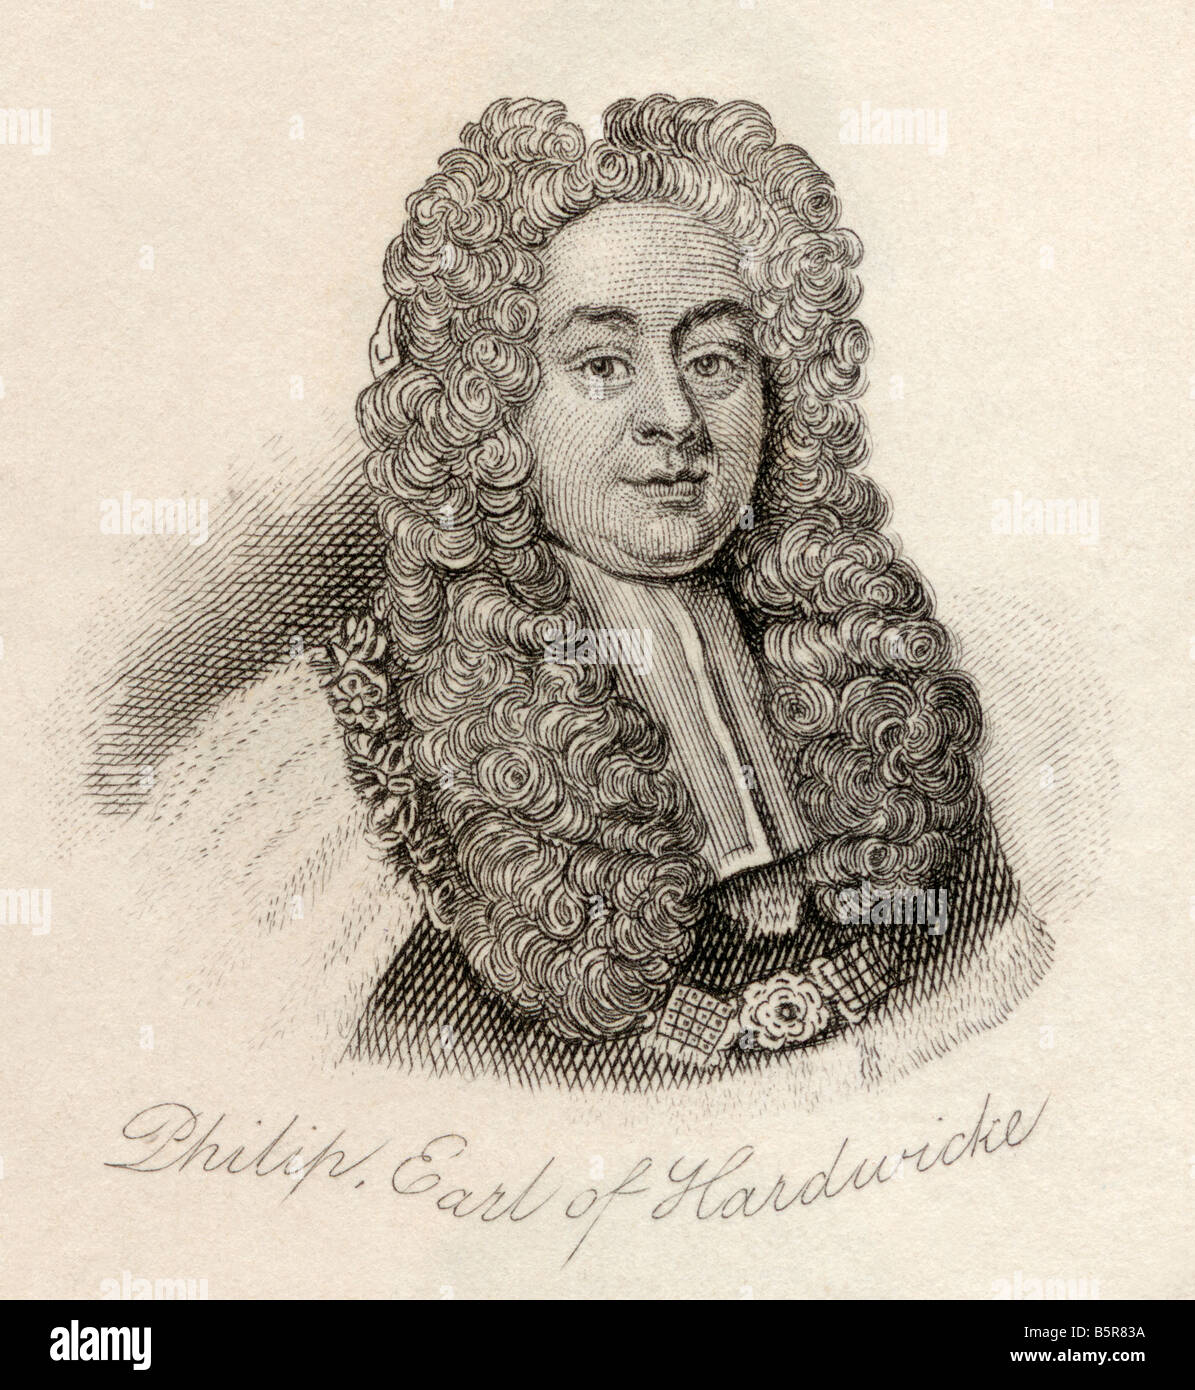 Philip Yorke, 1st Earl of Hardwicke, 1690 - 1764.  English lawyer, politician and Lord High Chancellor of Britain. Stock Photo